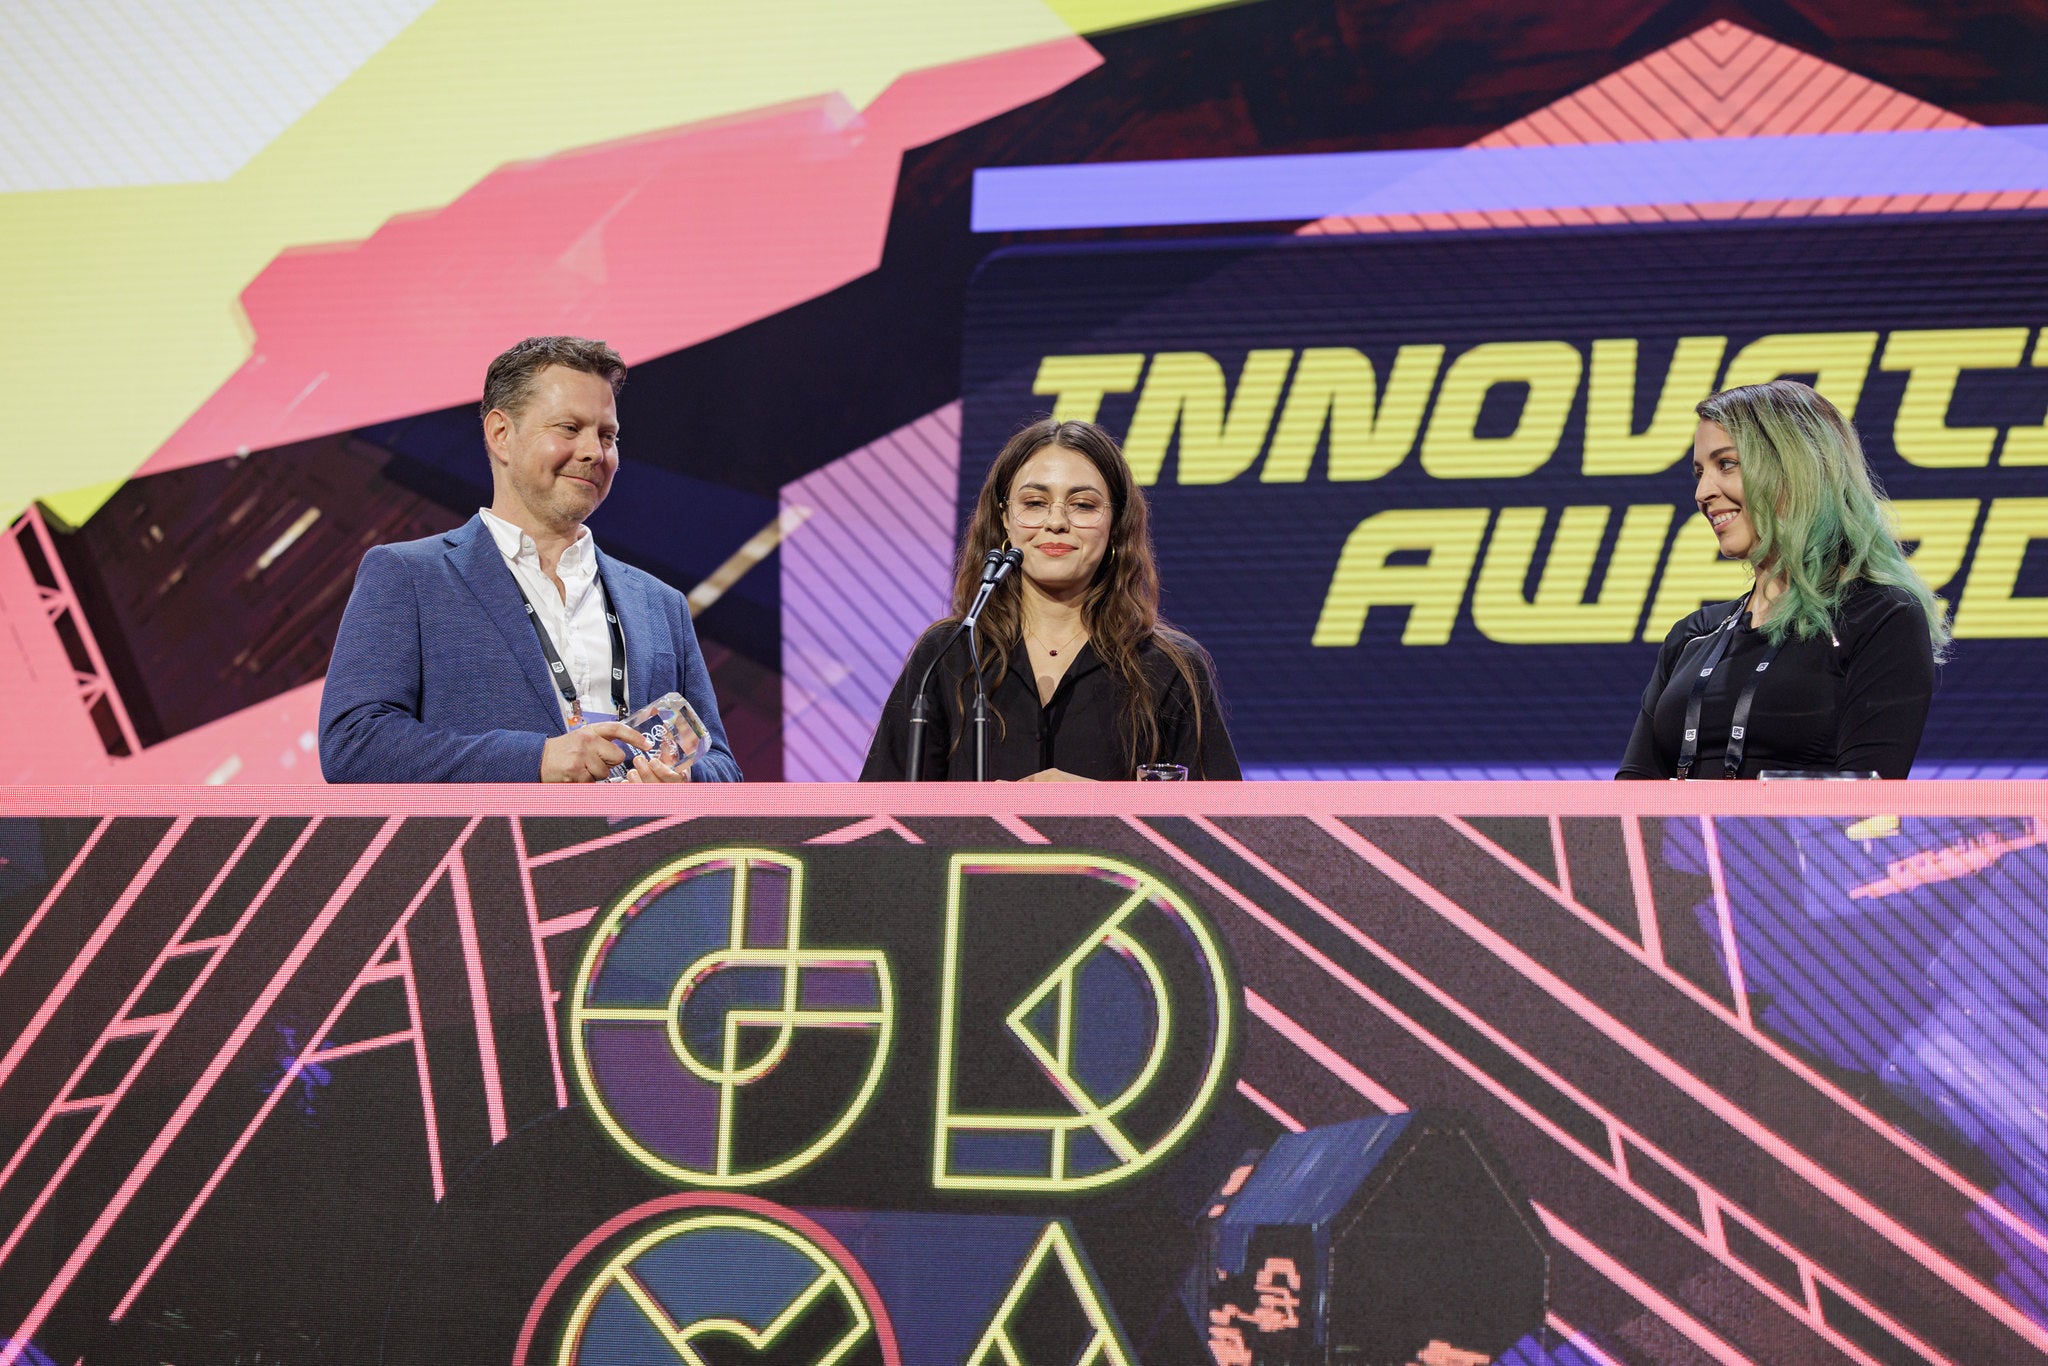 Half Mermaid, developers of Immortality, receive their GDC Award 2023 for Innovation